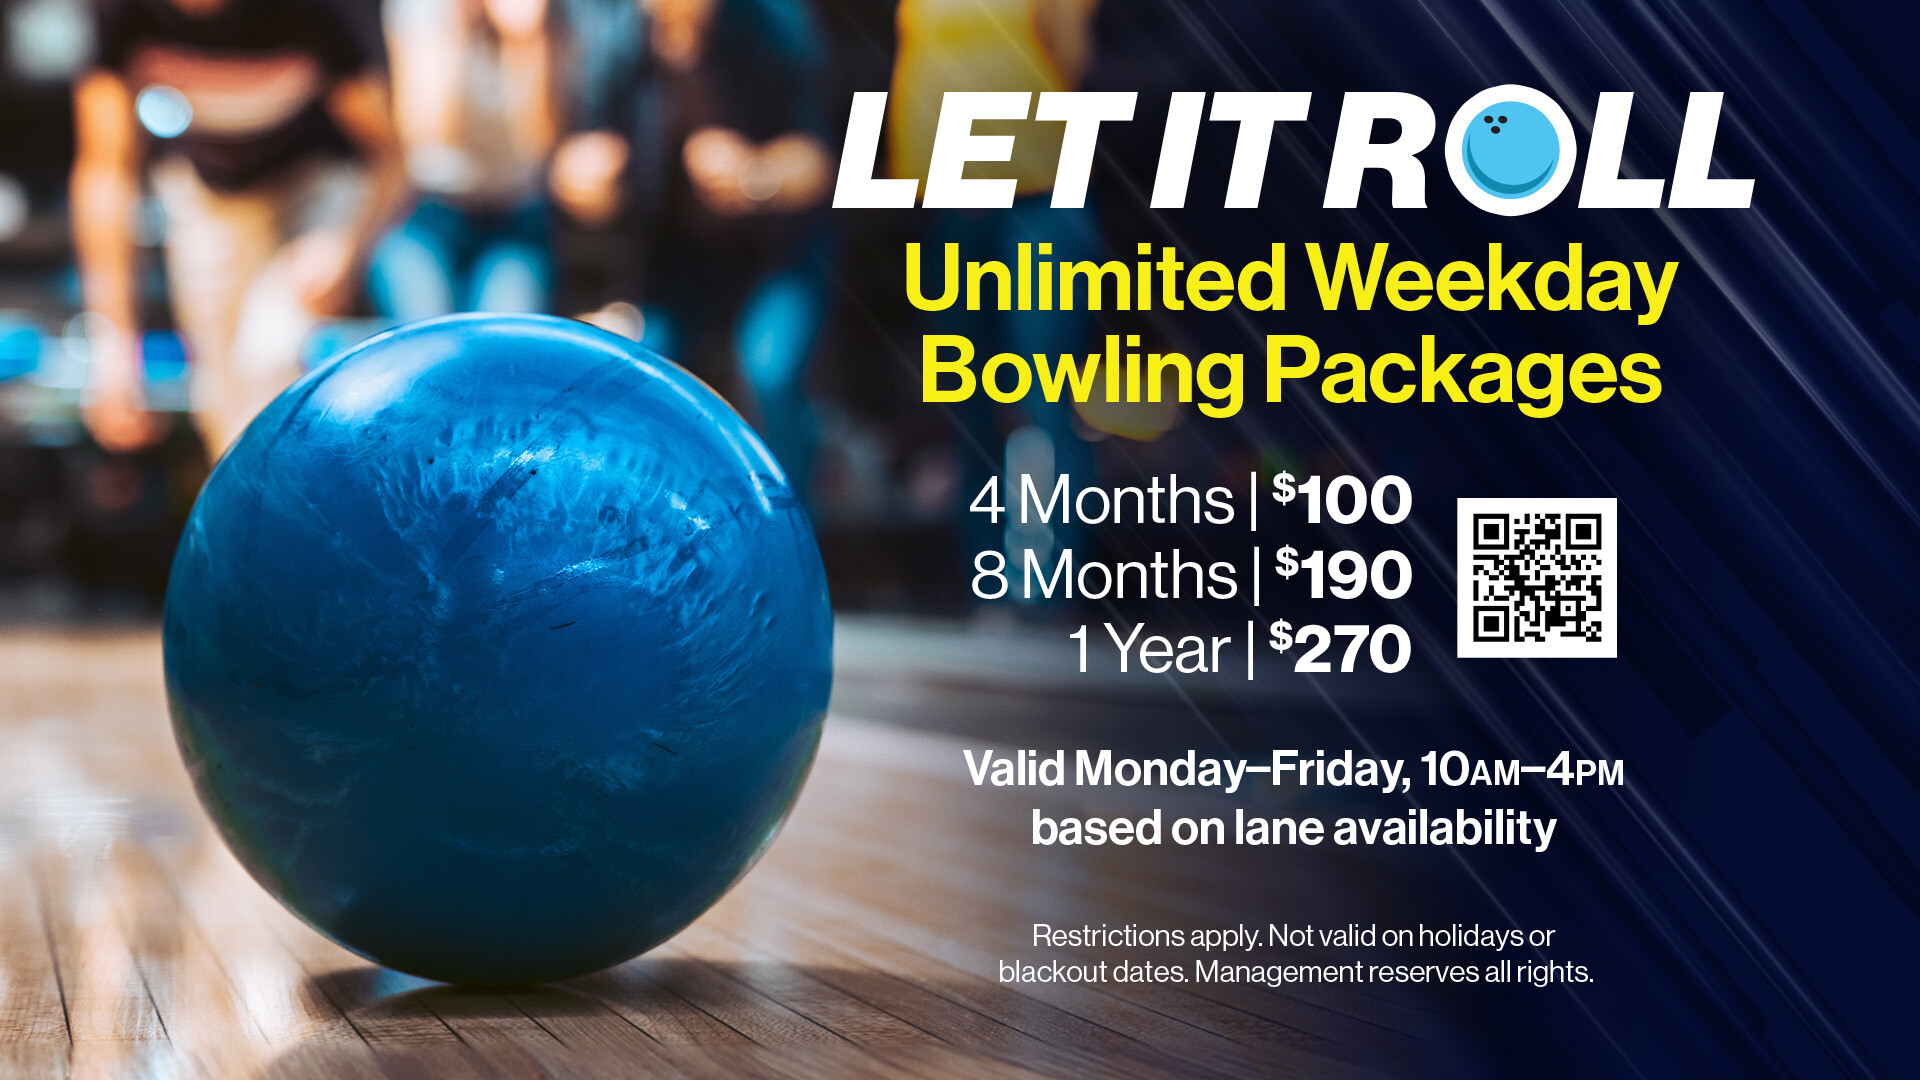 Let it Roll Unlimited Weekday Bowling Packages at the GSR Bowling Center